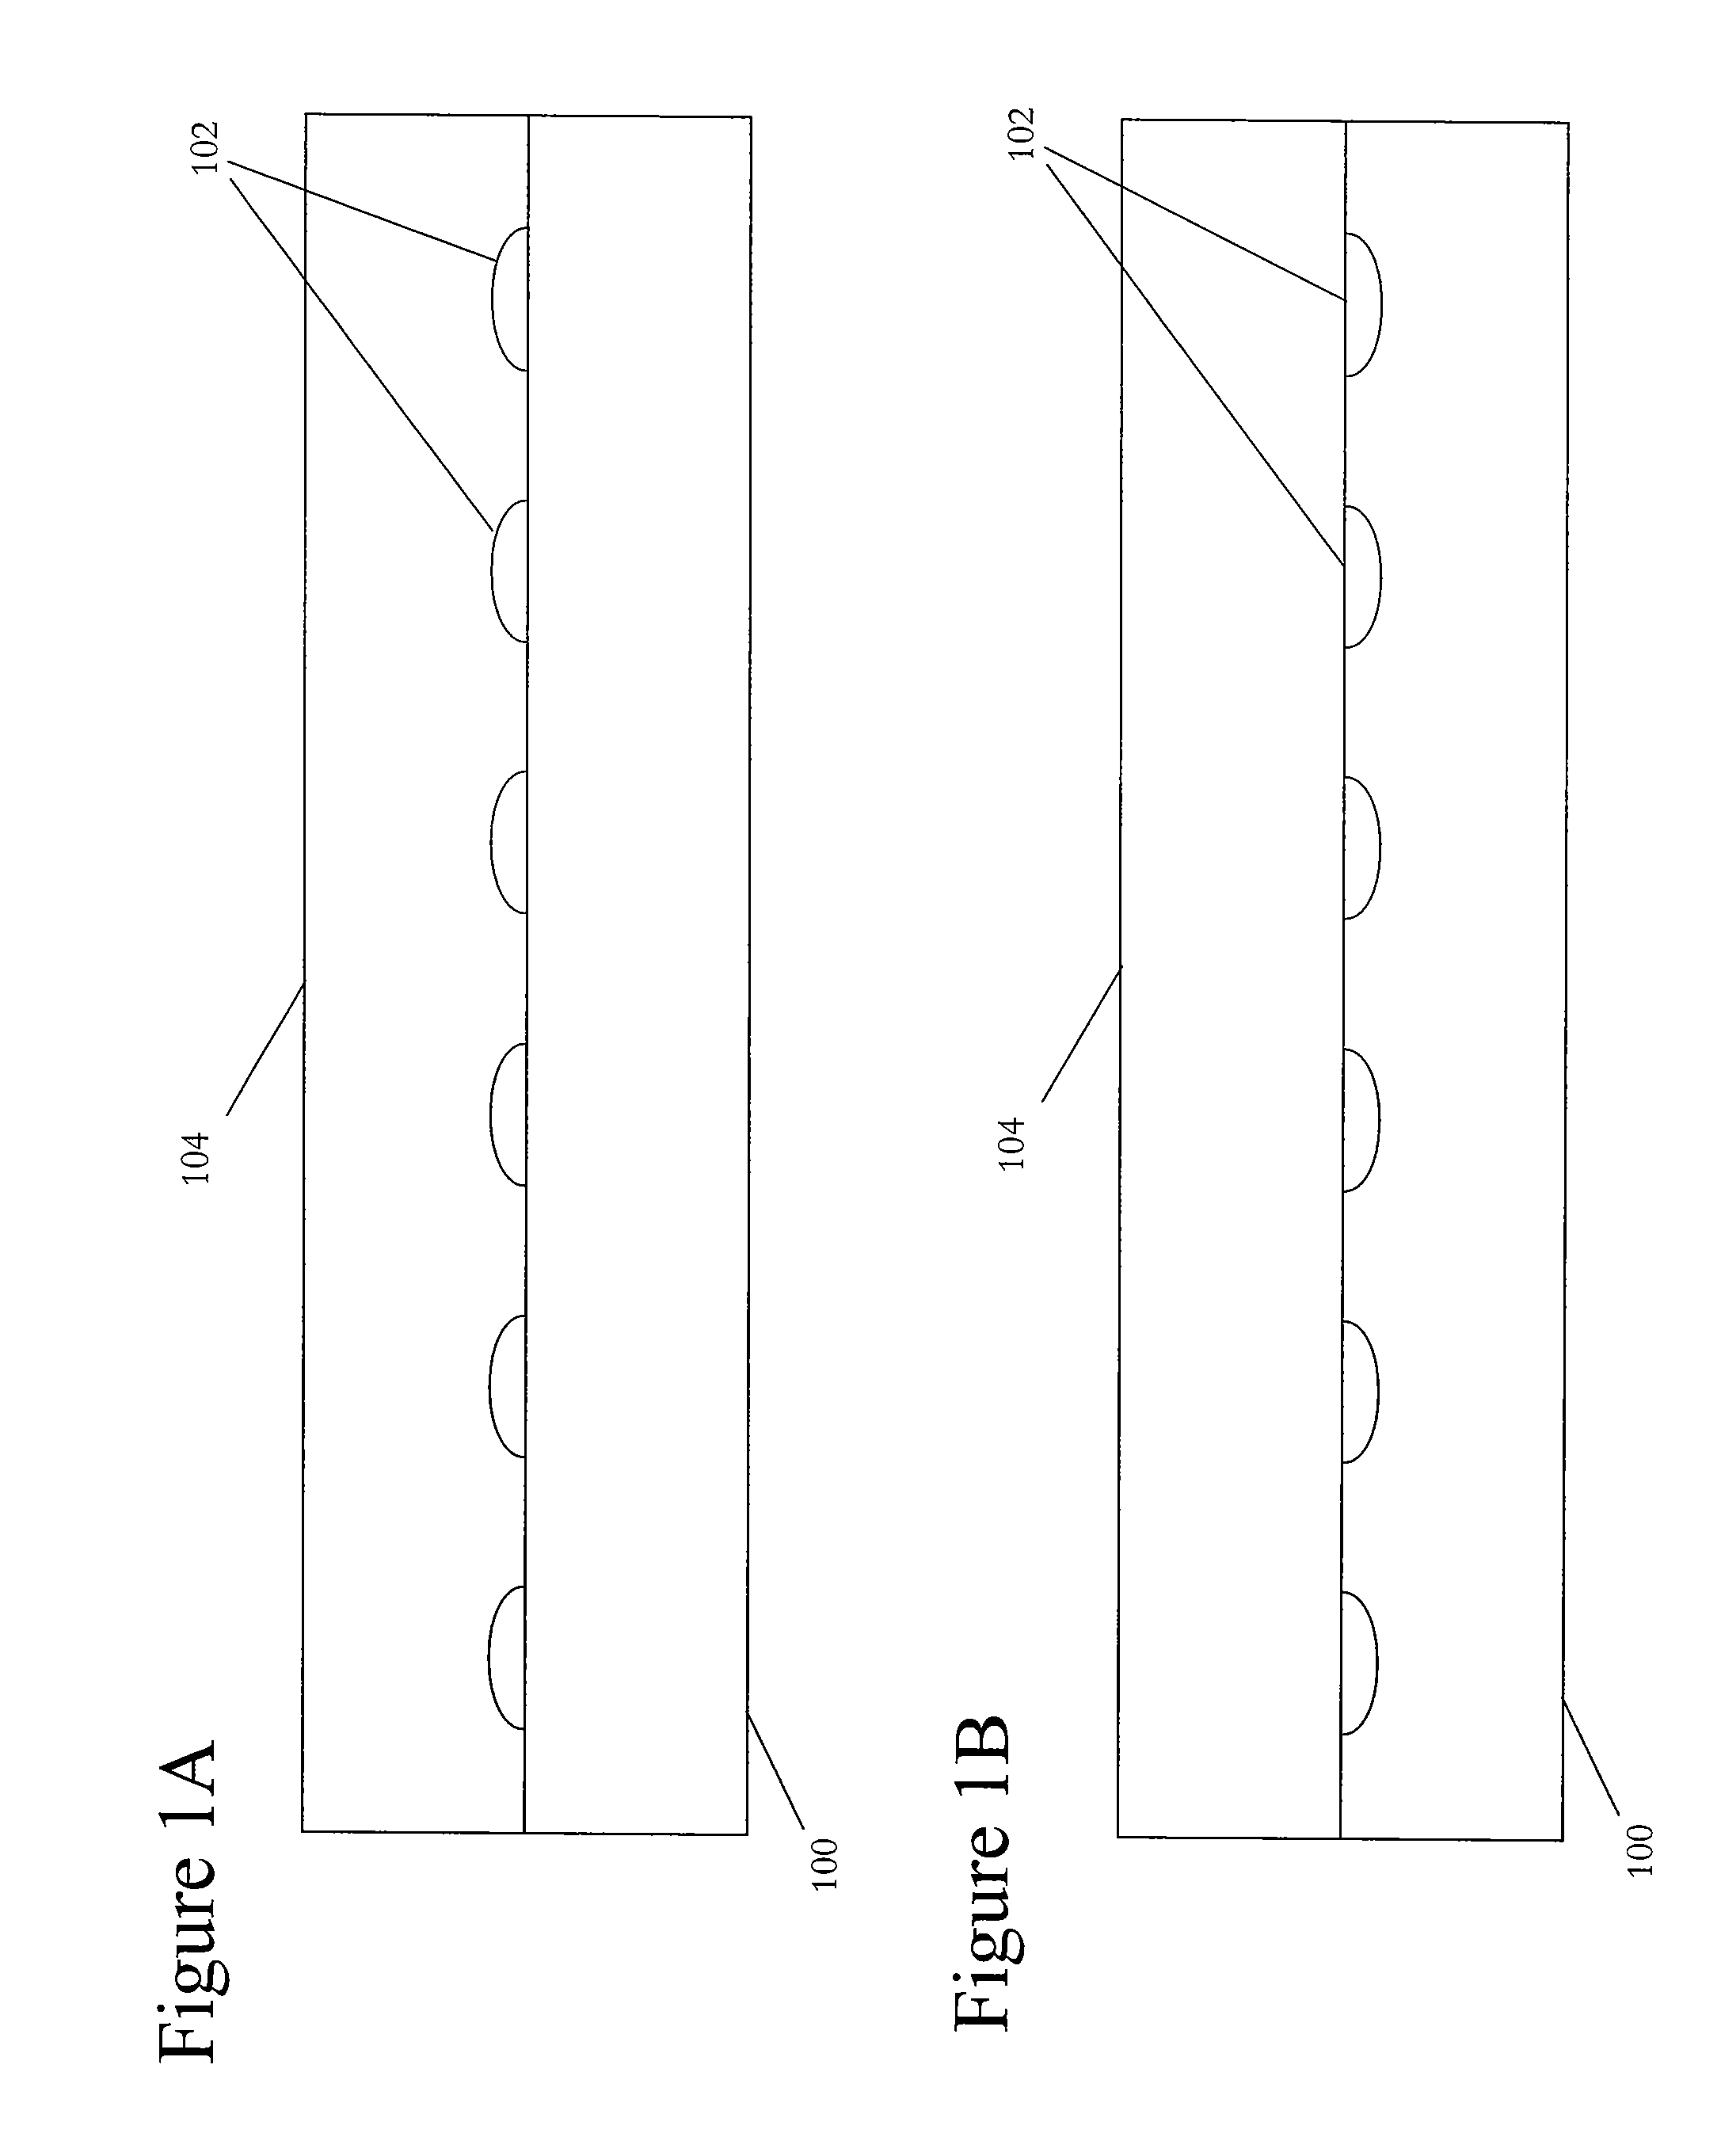 Electrode structure for fringe field charge injection